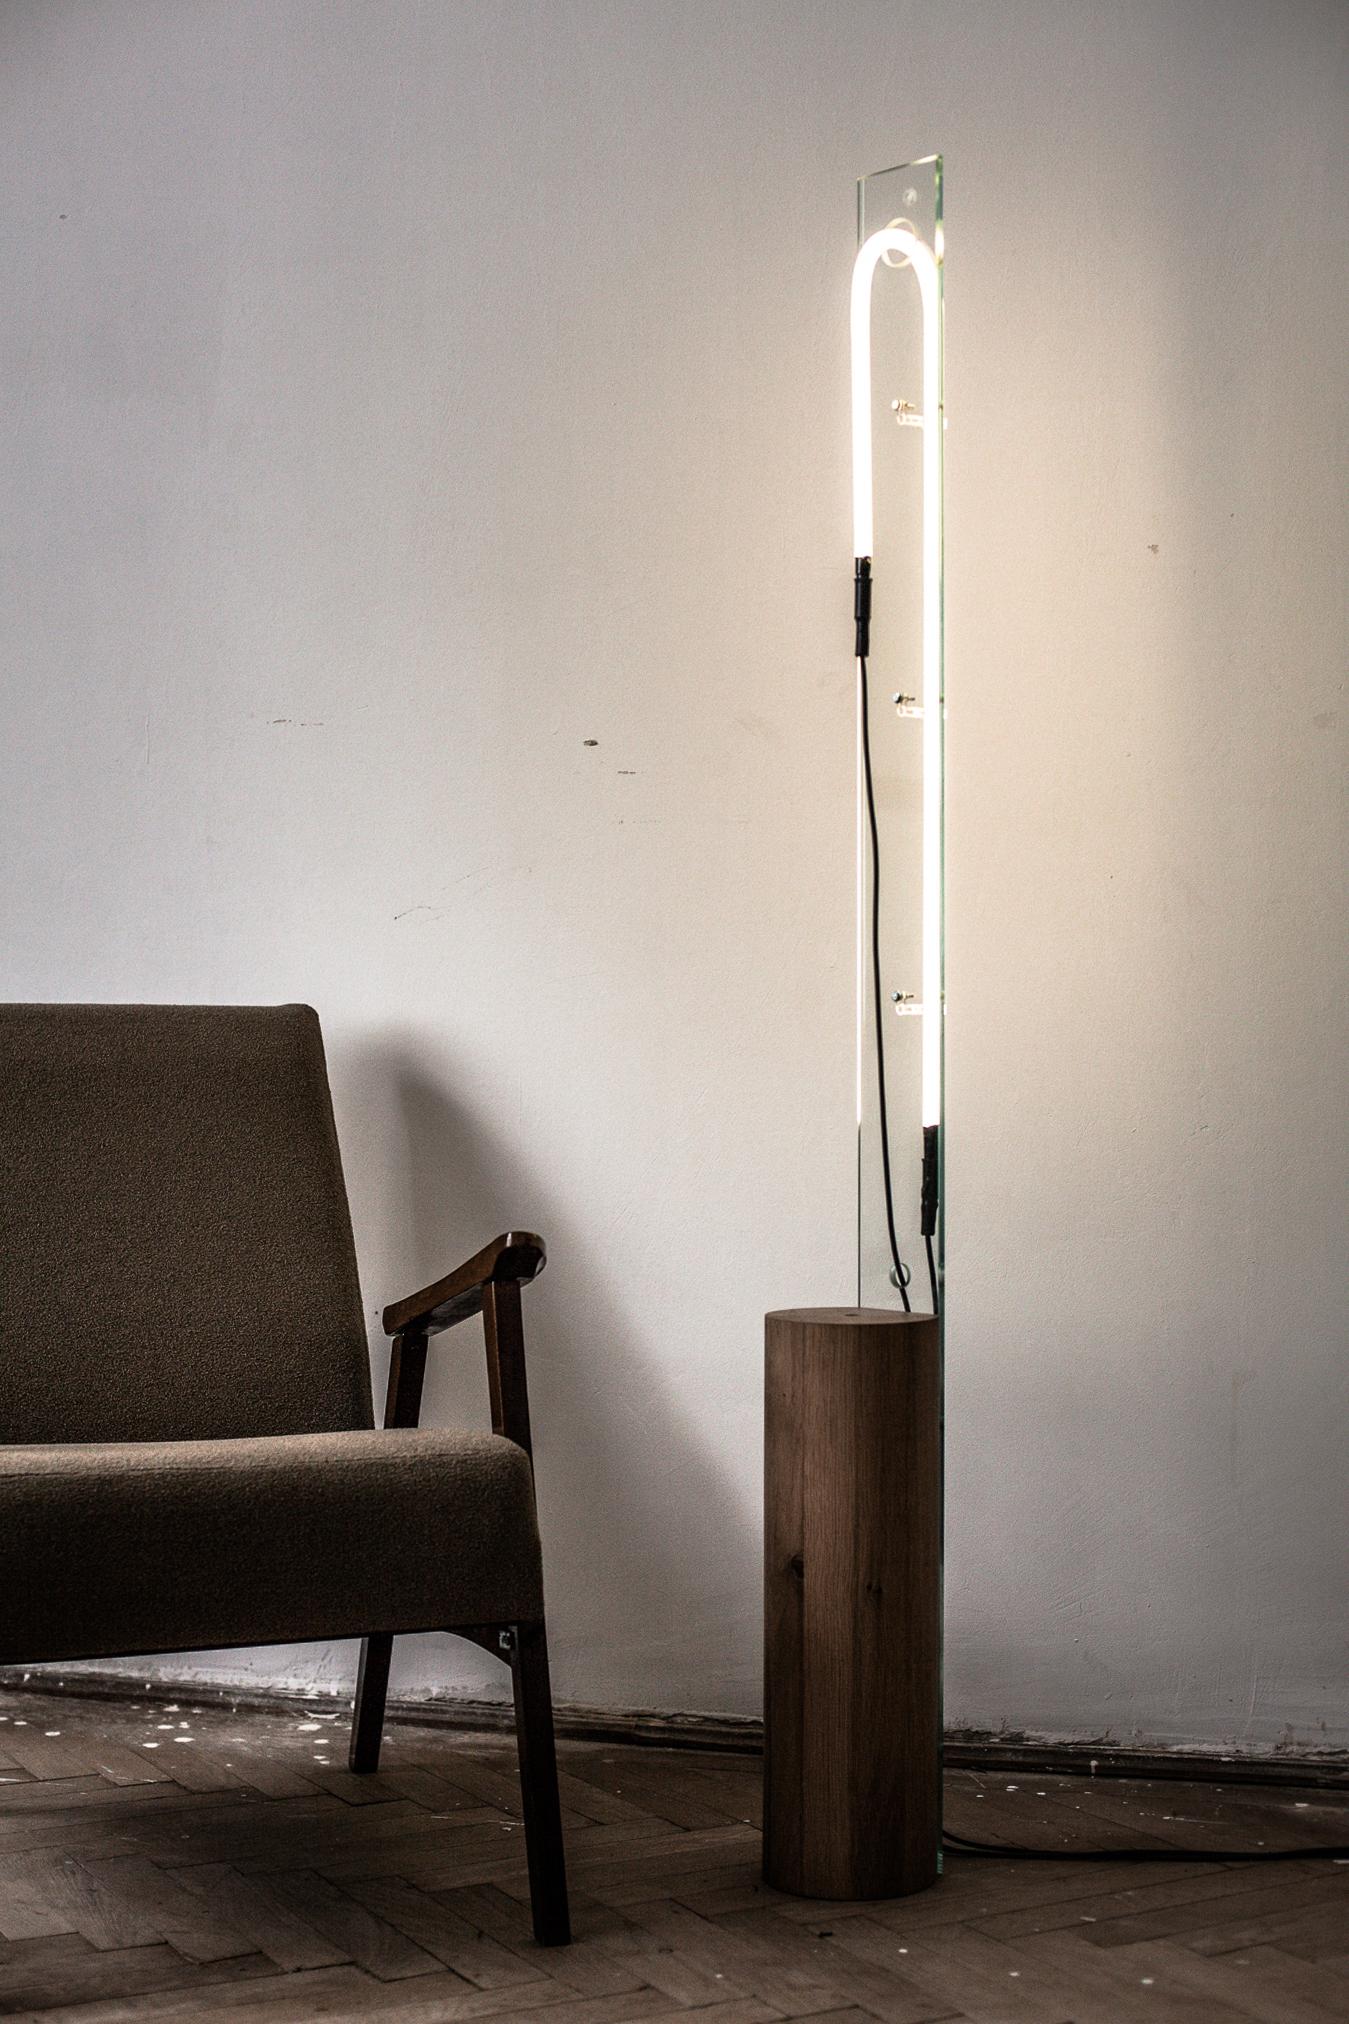 “Eight minutes old” is a family of sculptured objects and light installations. They’re part of a small series of two compositions and are made in a composition of wood and glass, using the light tube as a central element. The base of the lamp is a